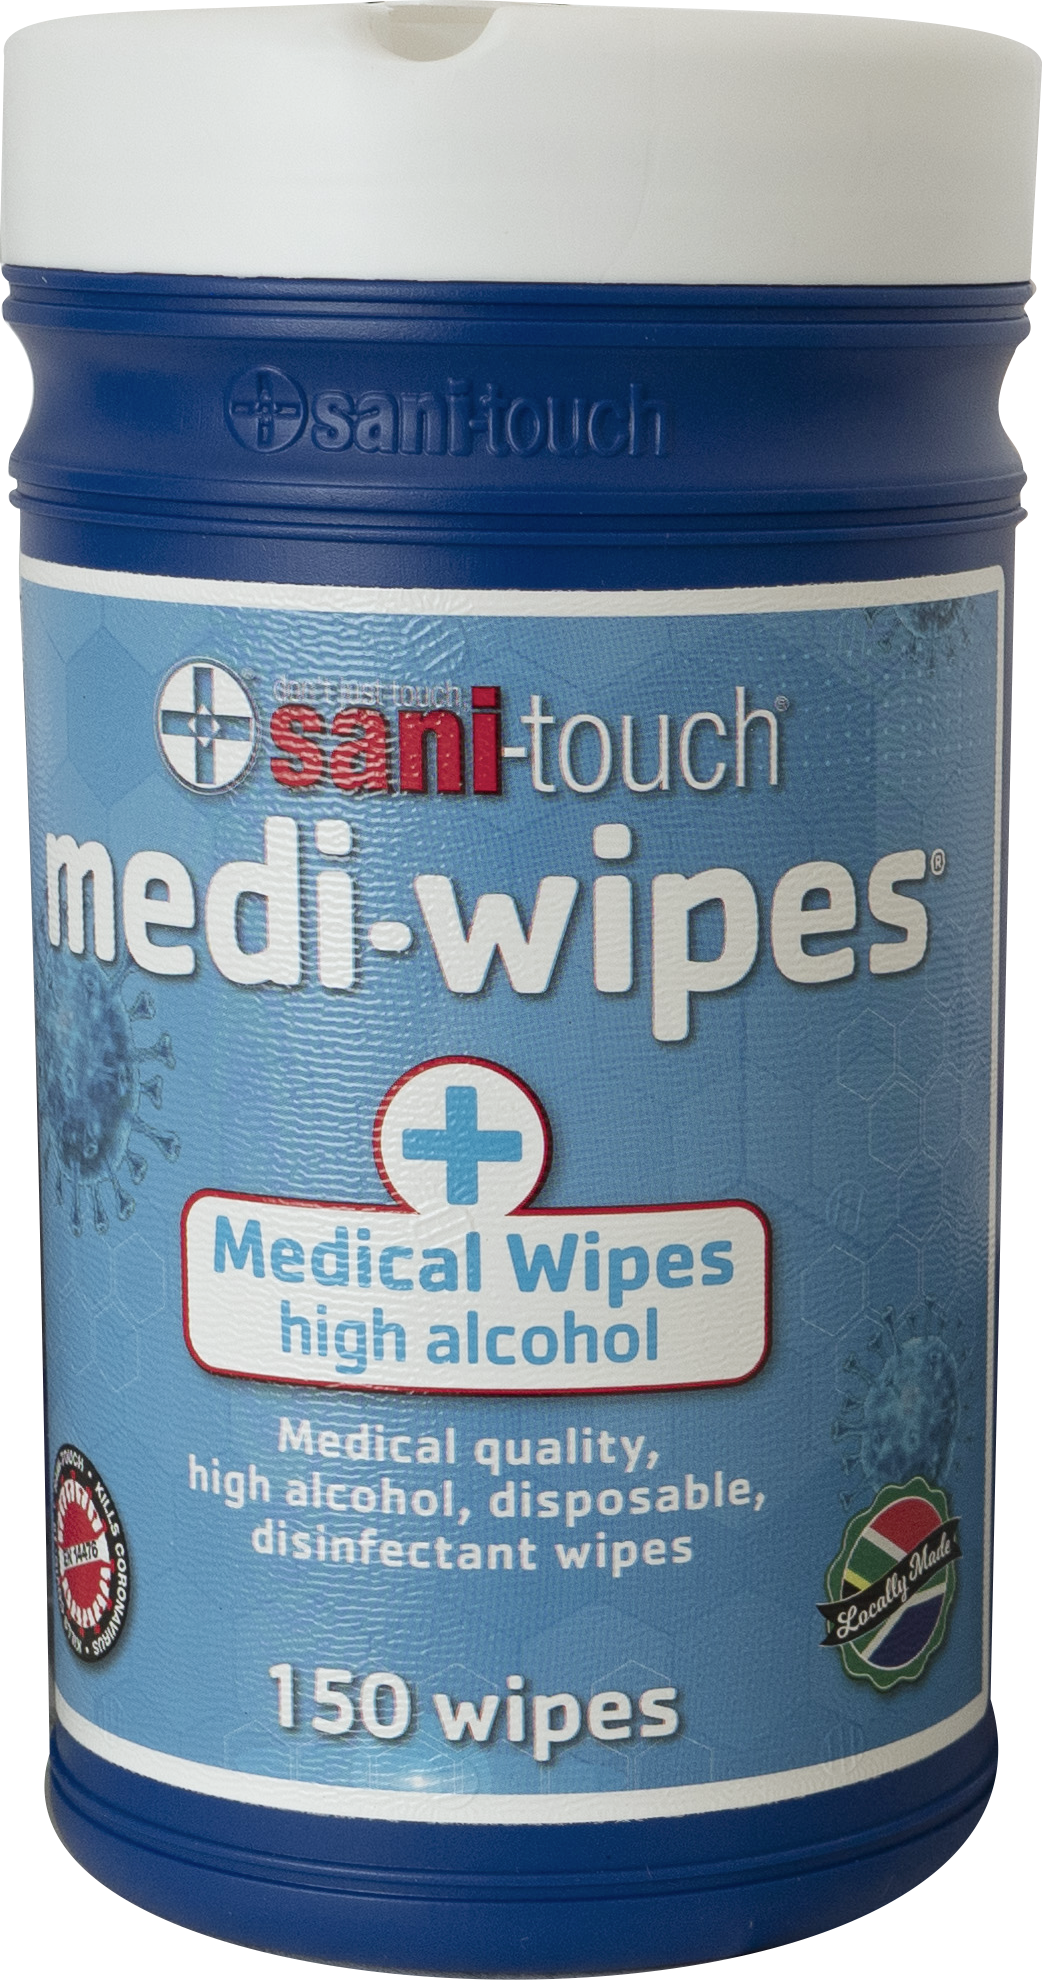 Medi-wipes Canister